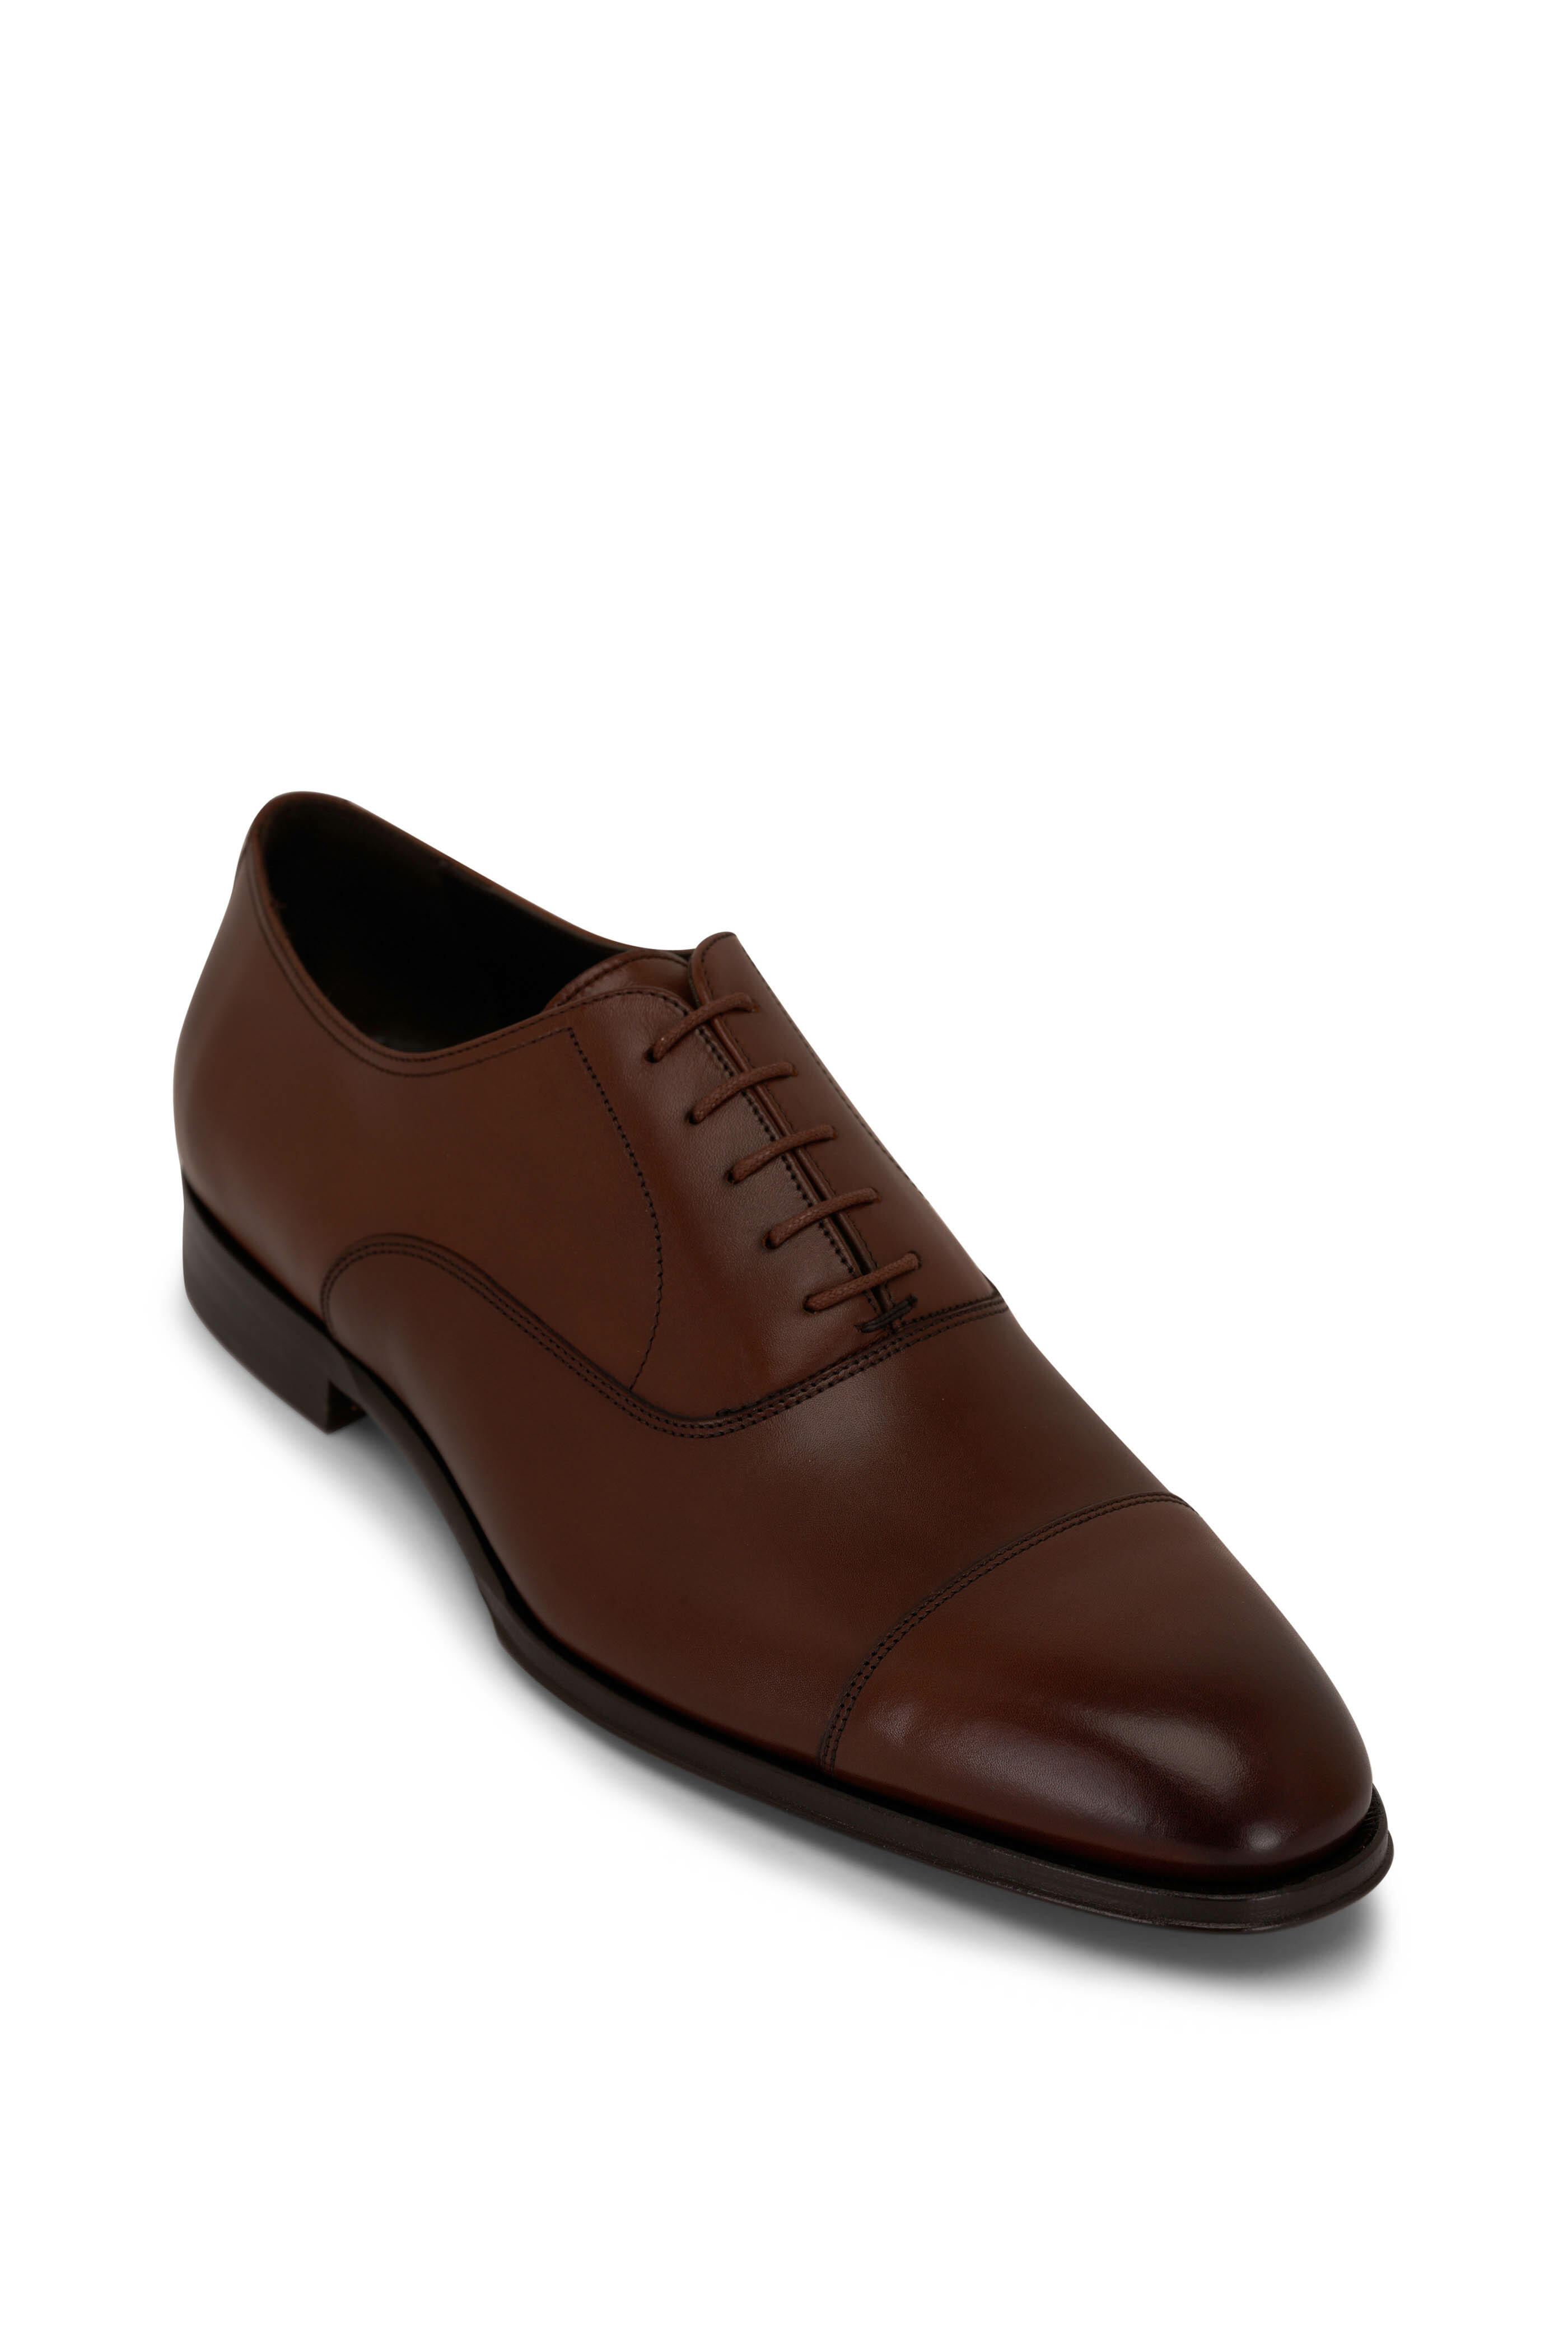 To Boot New York - Nico Brown Leather Lace-Up Dress Shoe